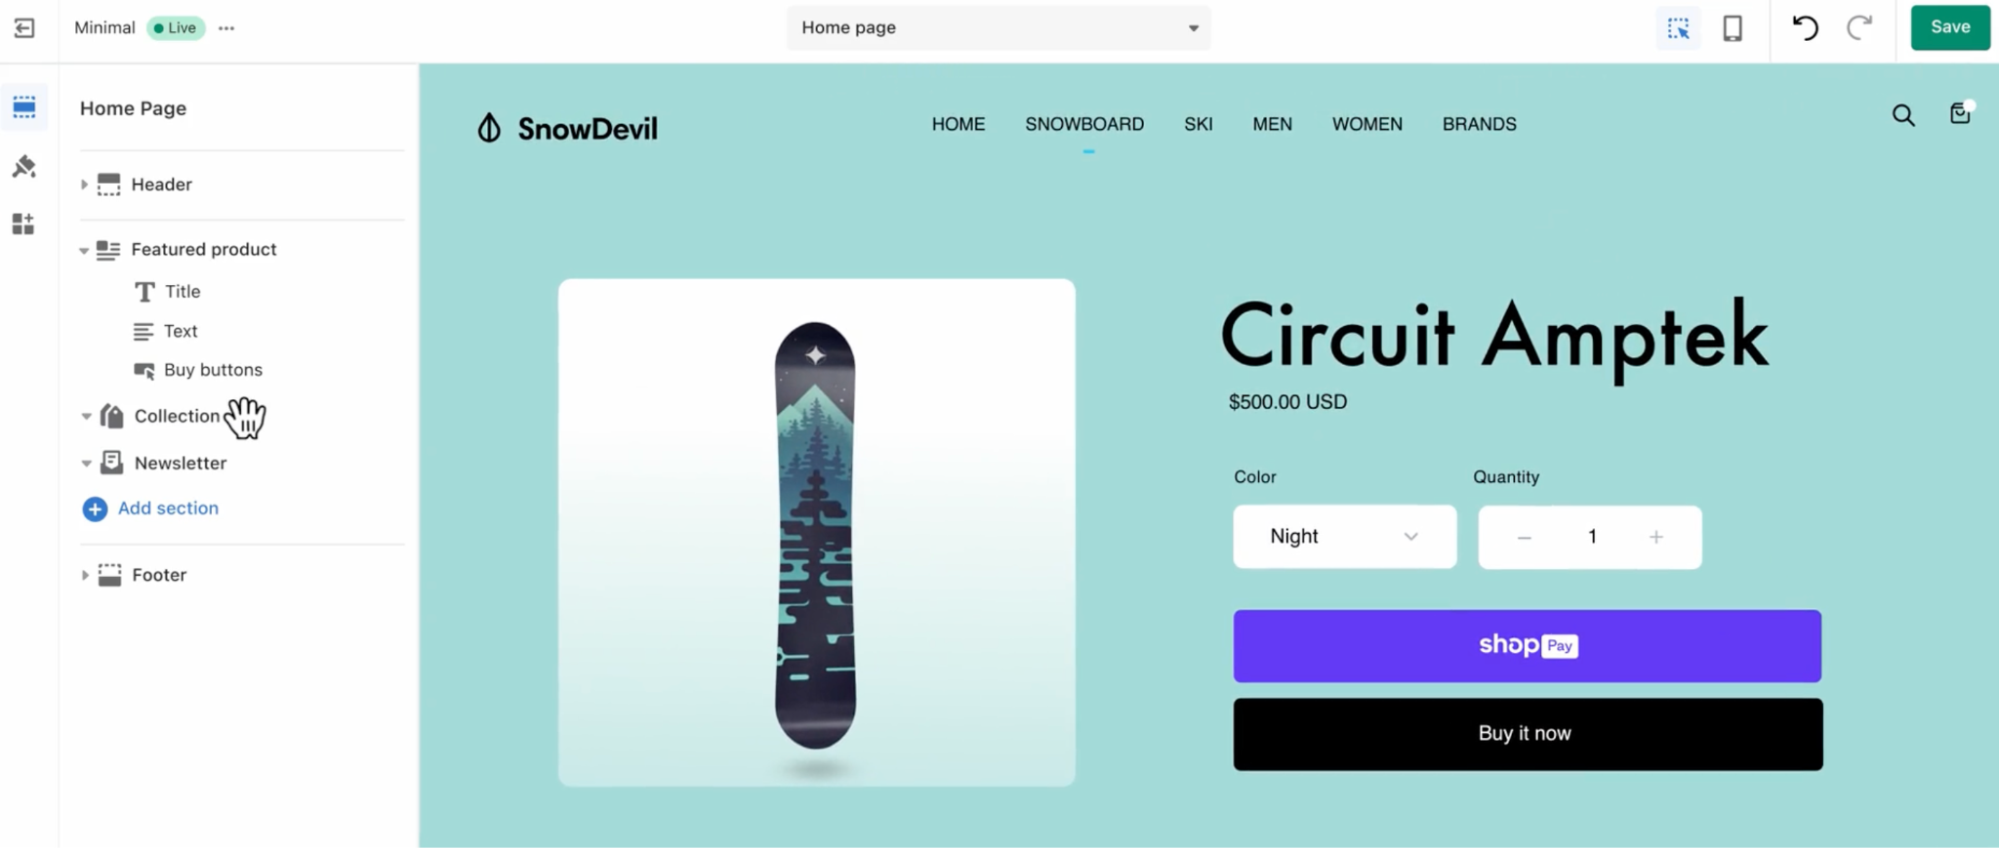 Shopify’s online store builder with a sample product page selling snowboards.